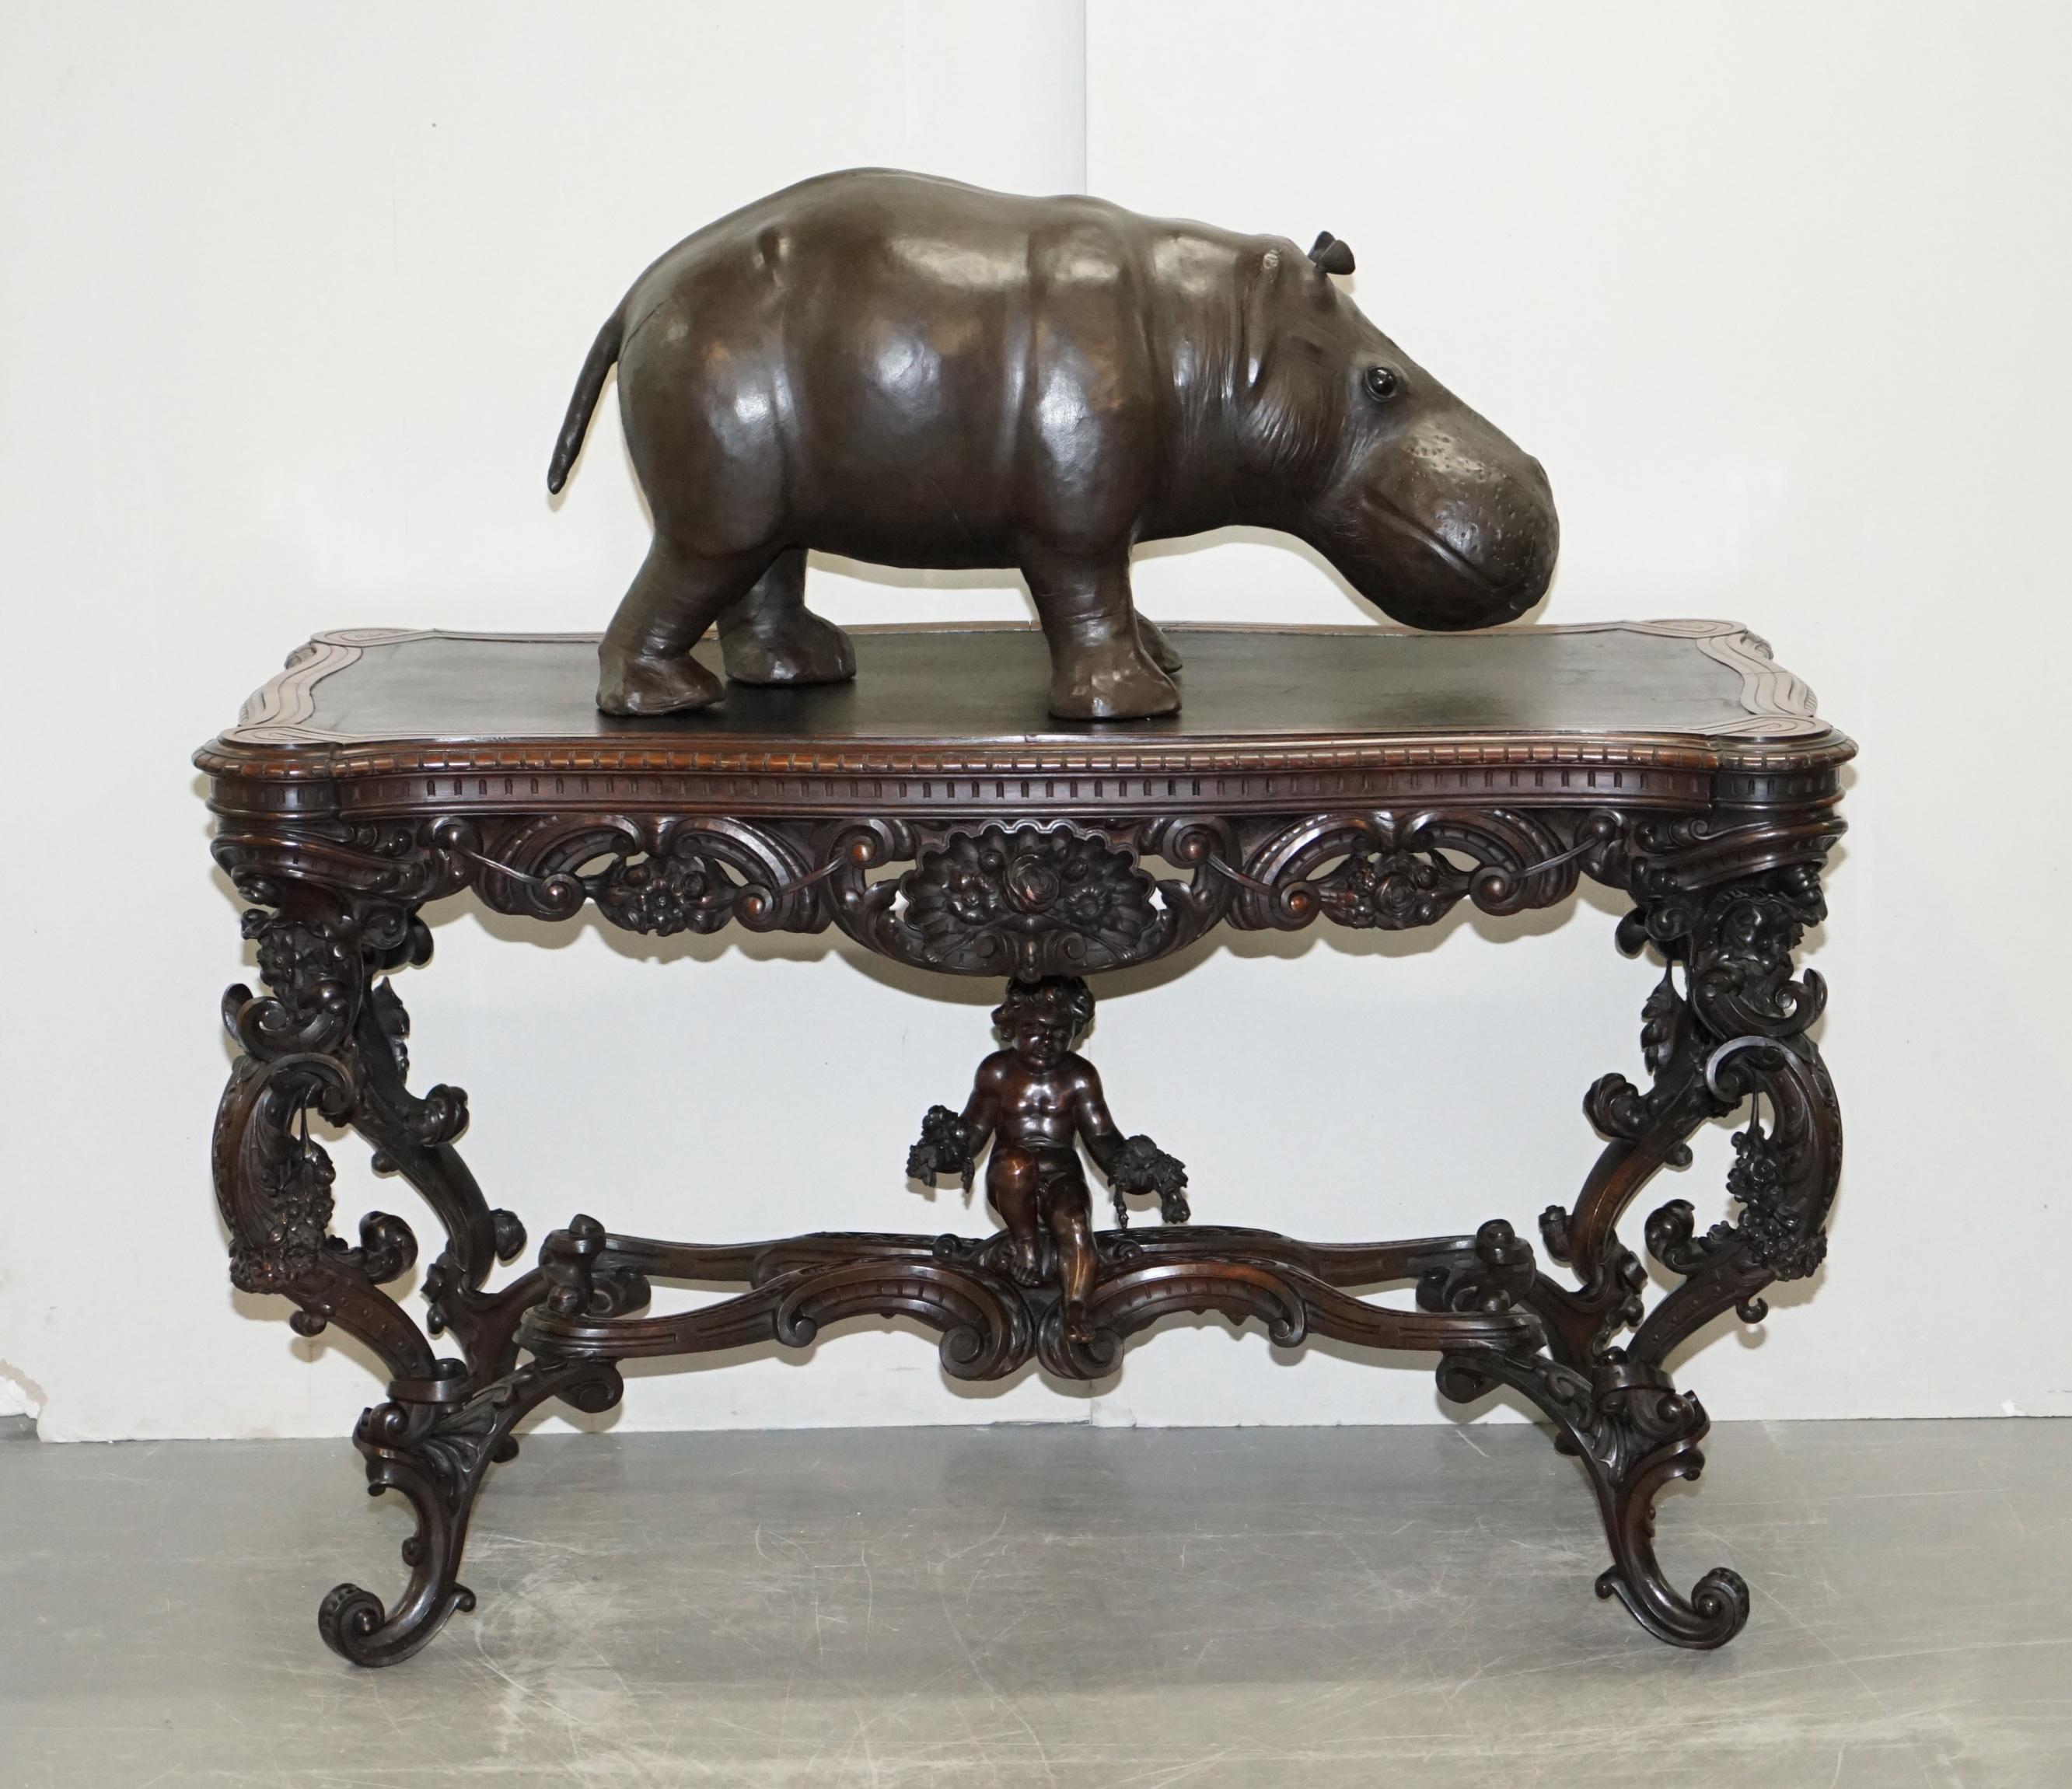 We are delighted to offer for sale this absolutely sublime very rare and original 1930’s Liberty’s London brown leather land dyed infant hippo stool or footstool bench.

These come in varying sizes, this is the extra large size which is around a